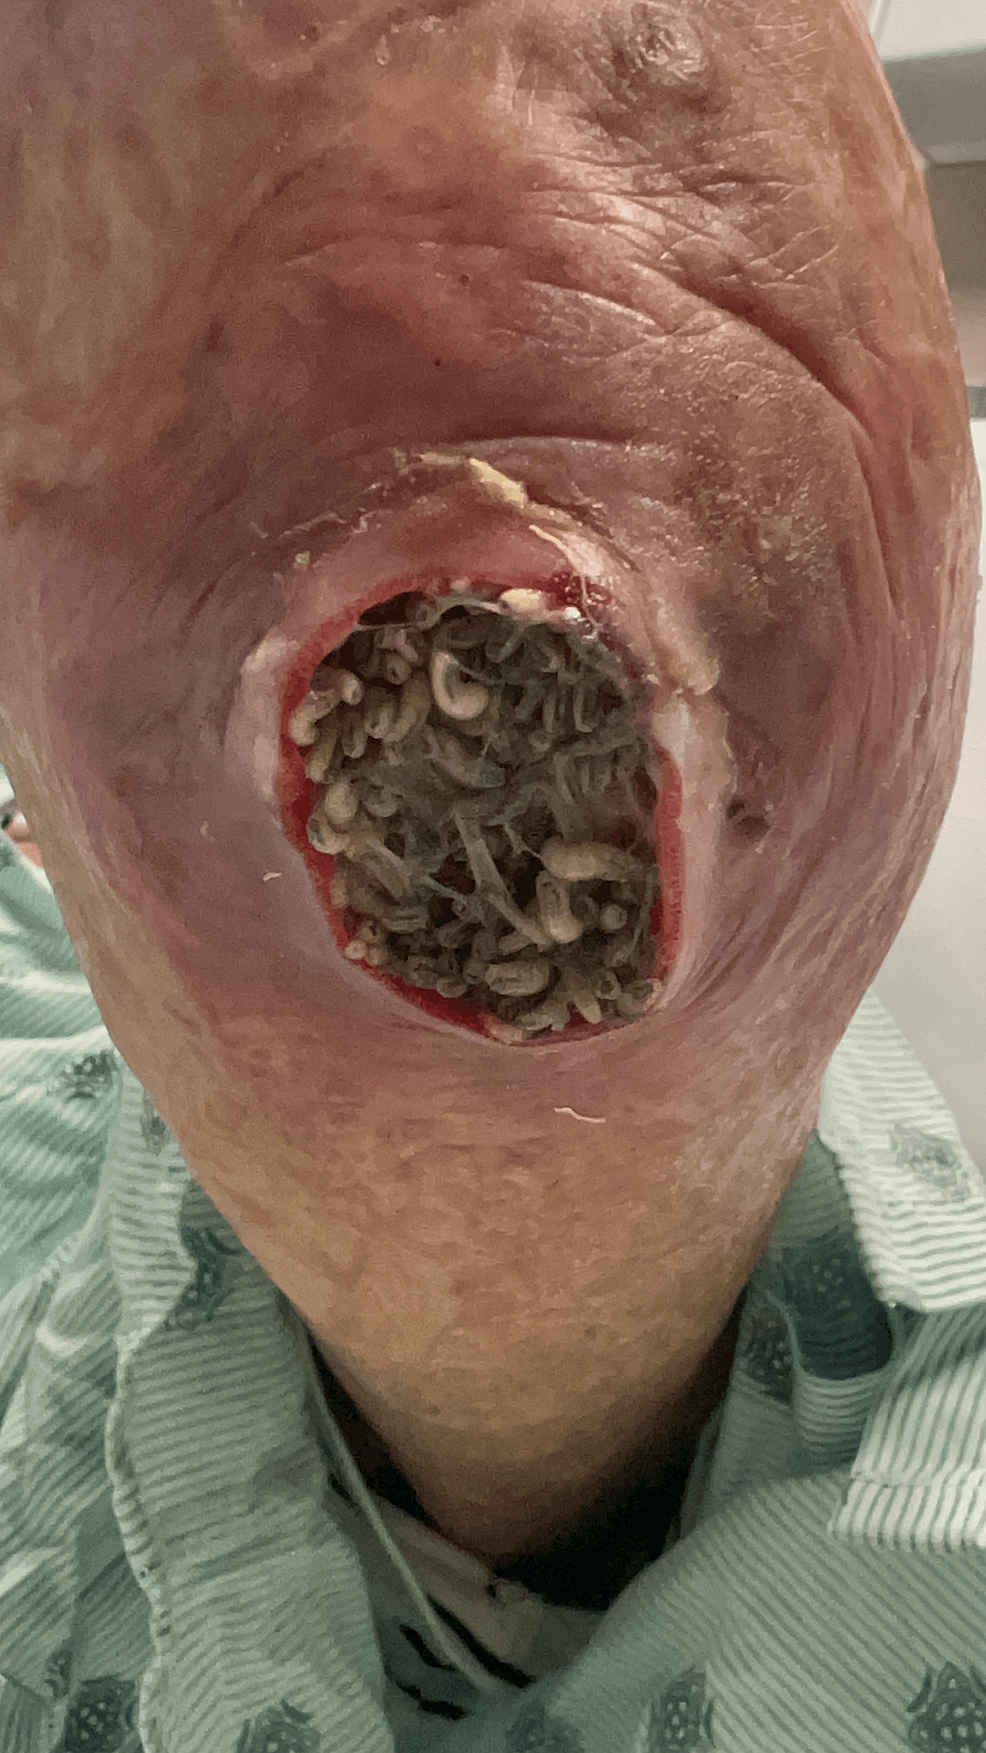 Cureus, Flesh Fly Maggot-Infected Abscess in a Burn Victim Patient in the  United States Without a History of International Travel: A Case Report